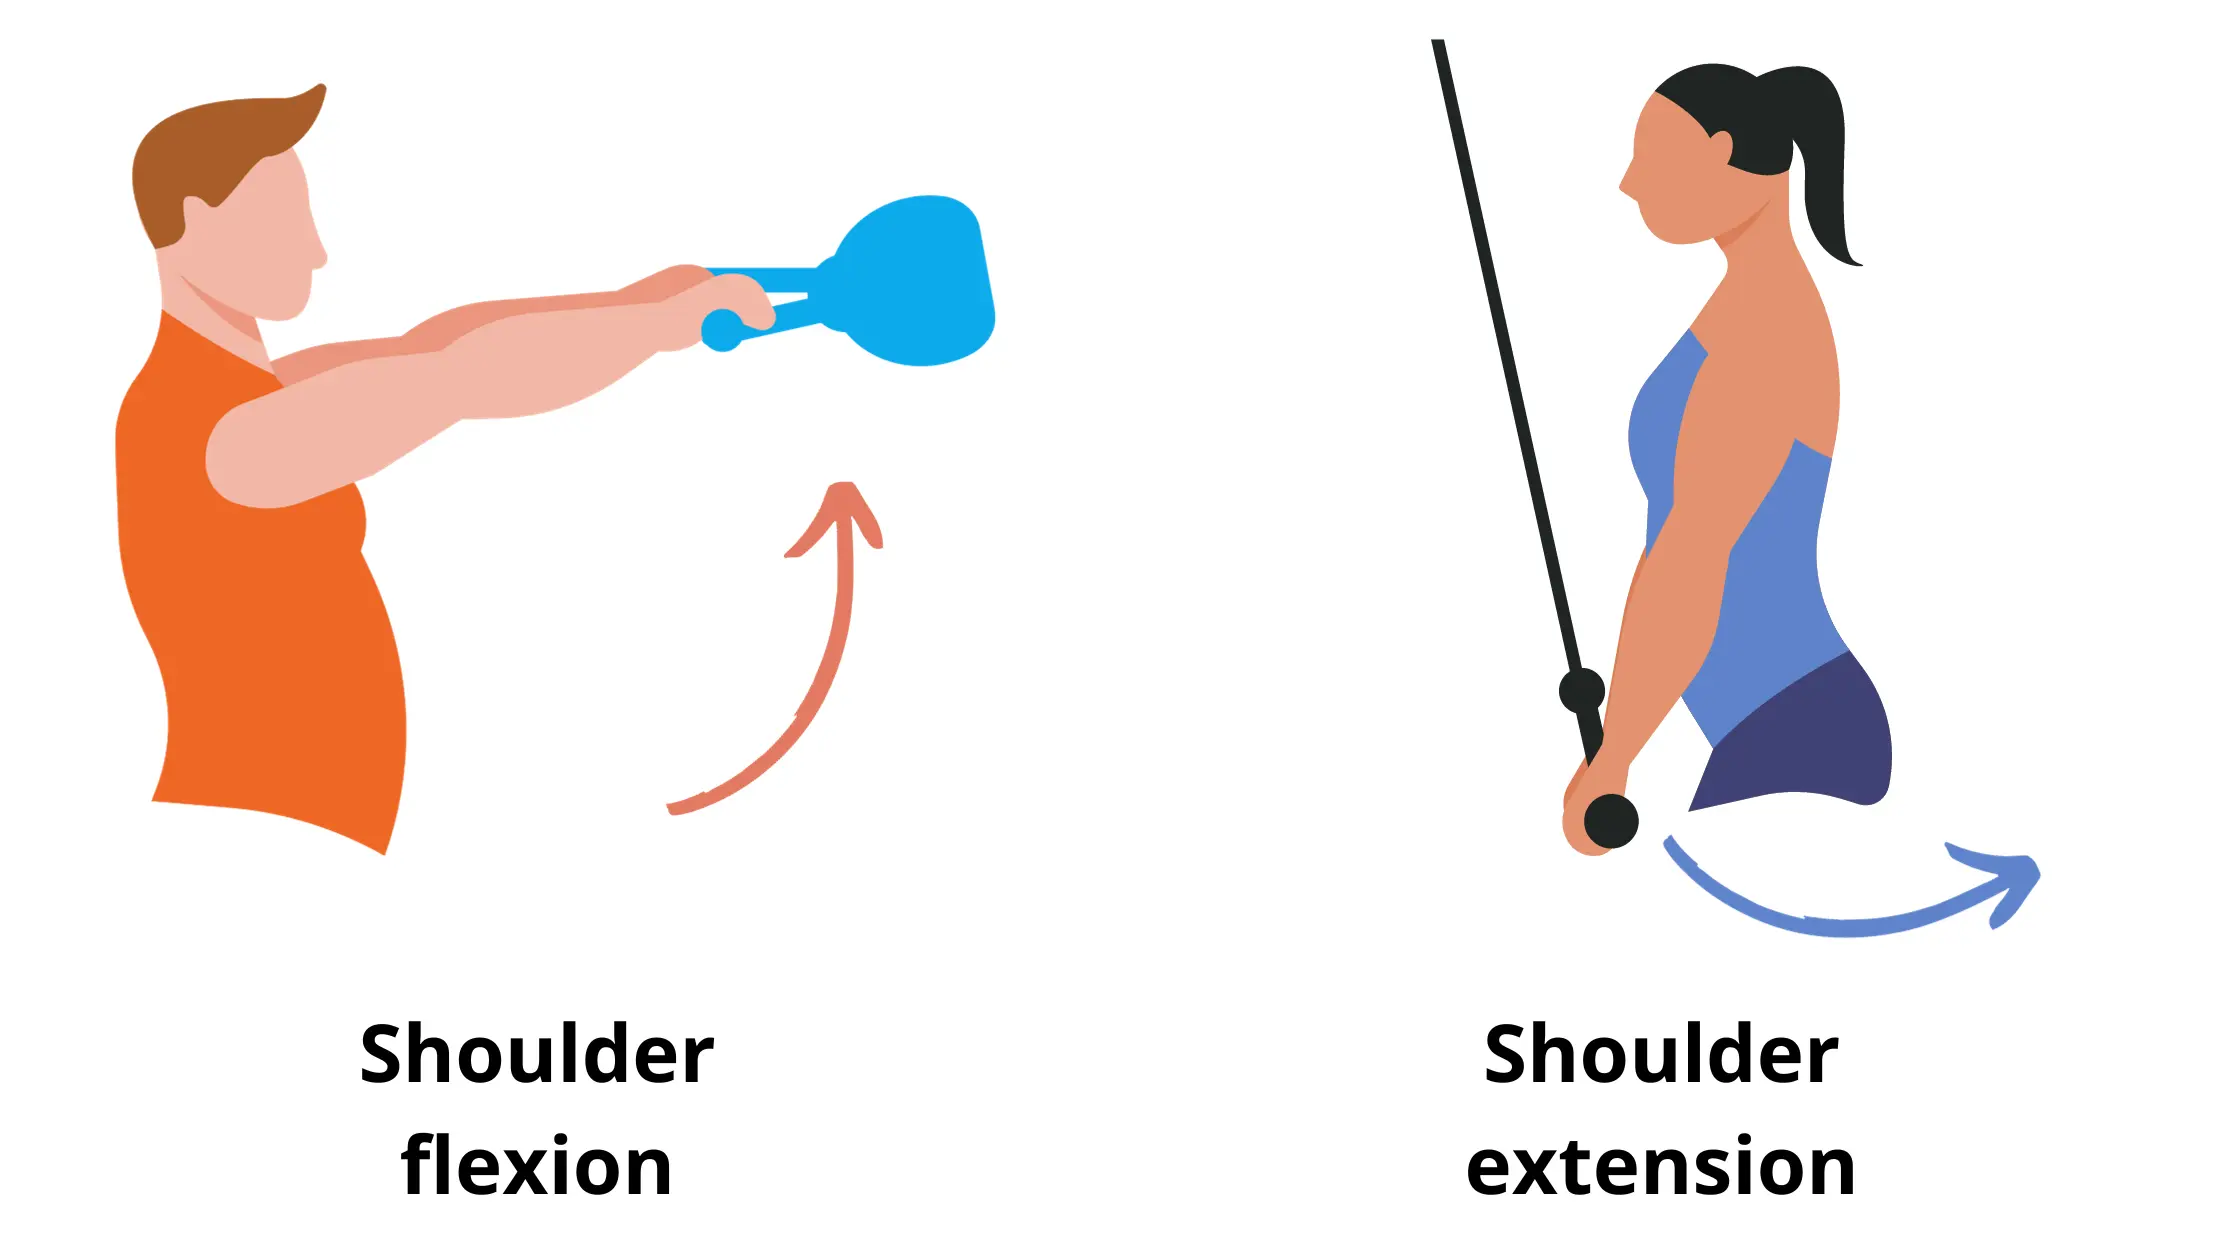 Some of the scapula allowed movements such as flexion and extension of the arm